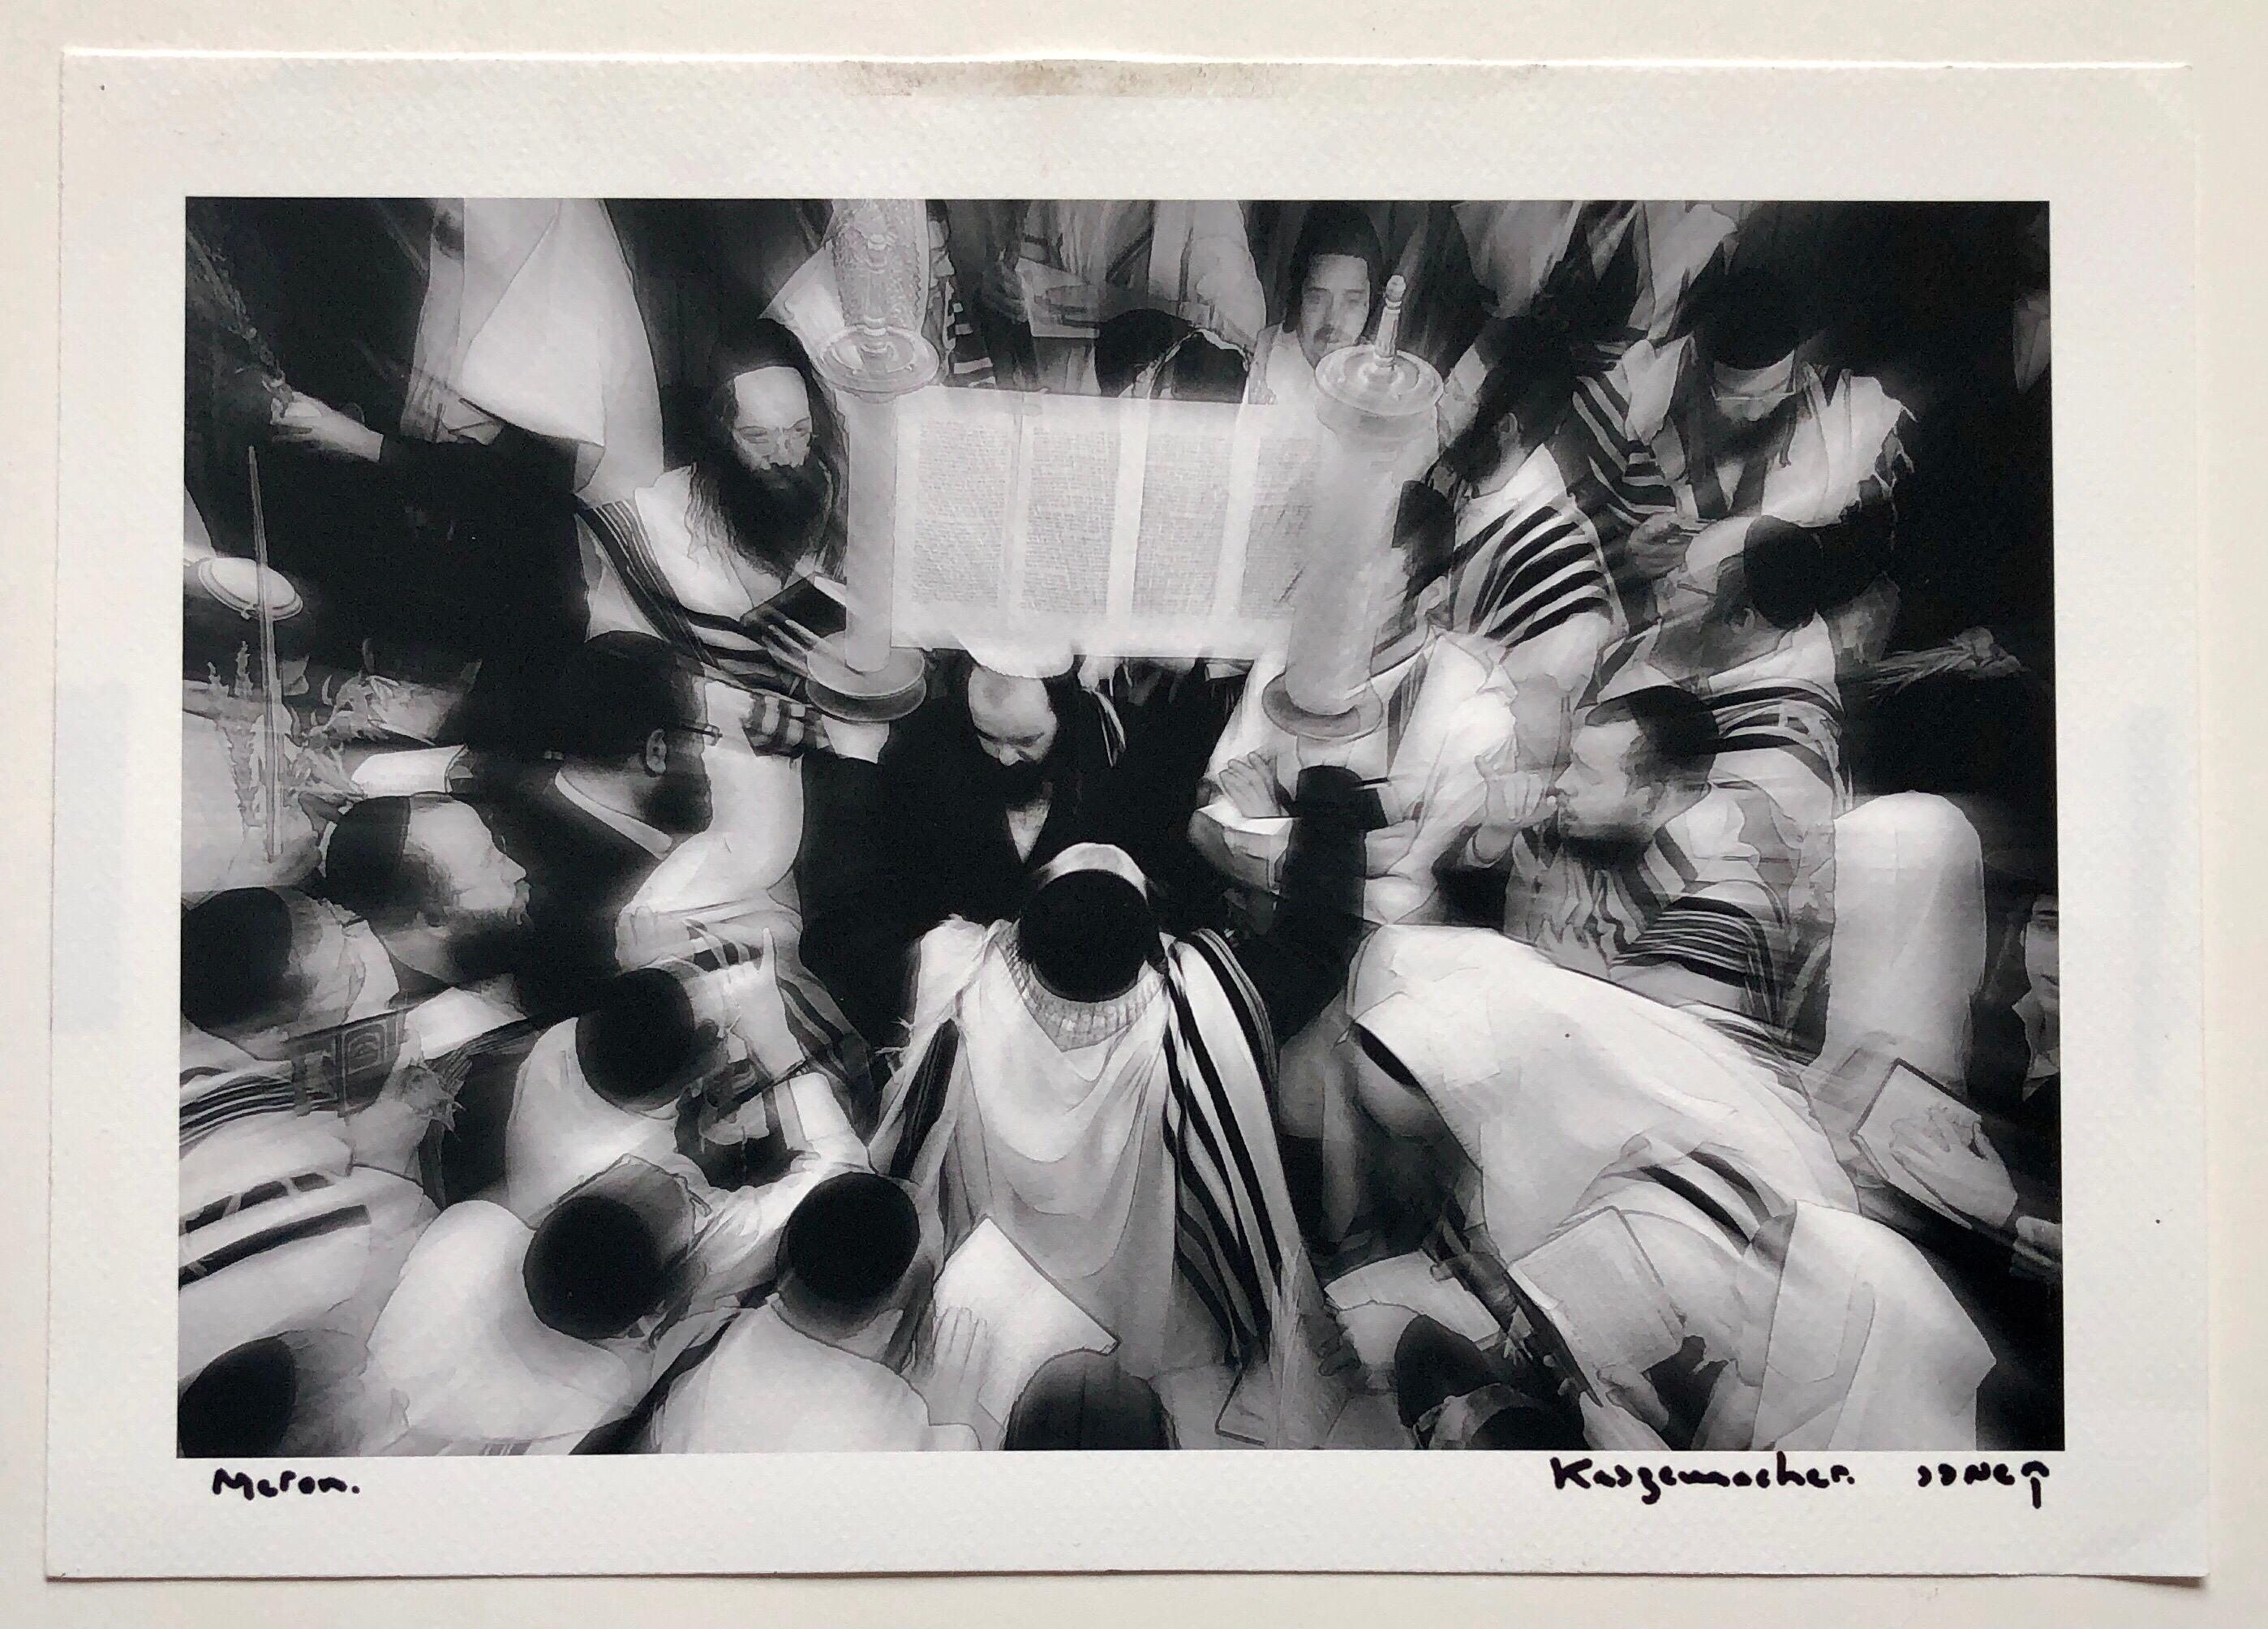 This one is signed and has the name of the city Meron hand written on it. It is printed on a wove matte paper.
Ya'acov Kaszemacher, well-known artist and photographer whose unique images of Hasidic festivities are fascinating to view, and offer one